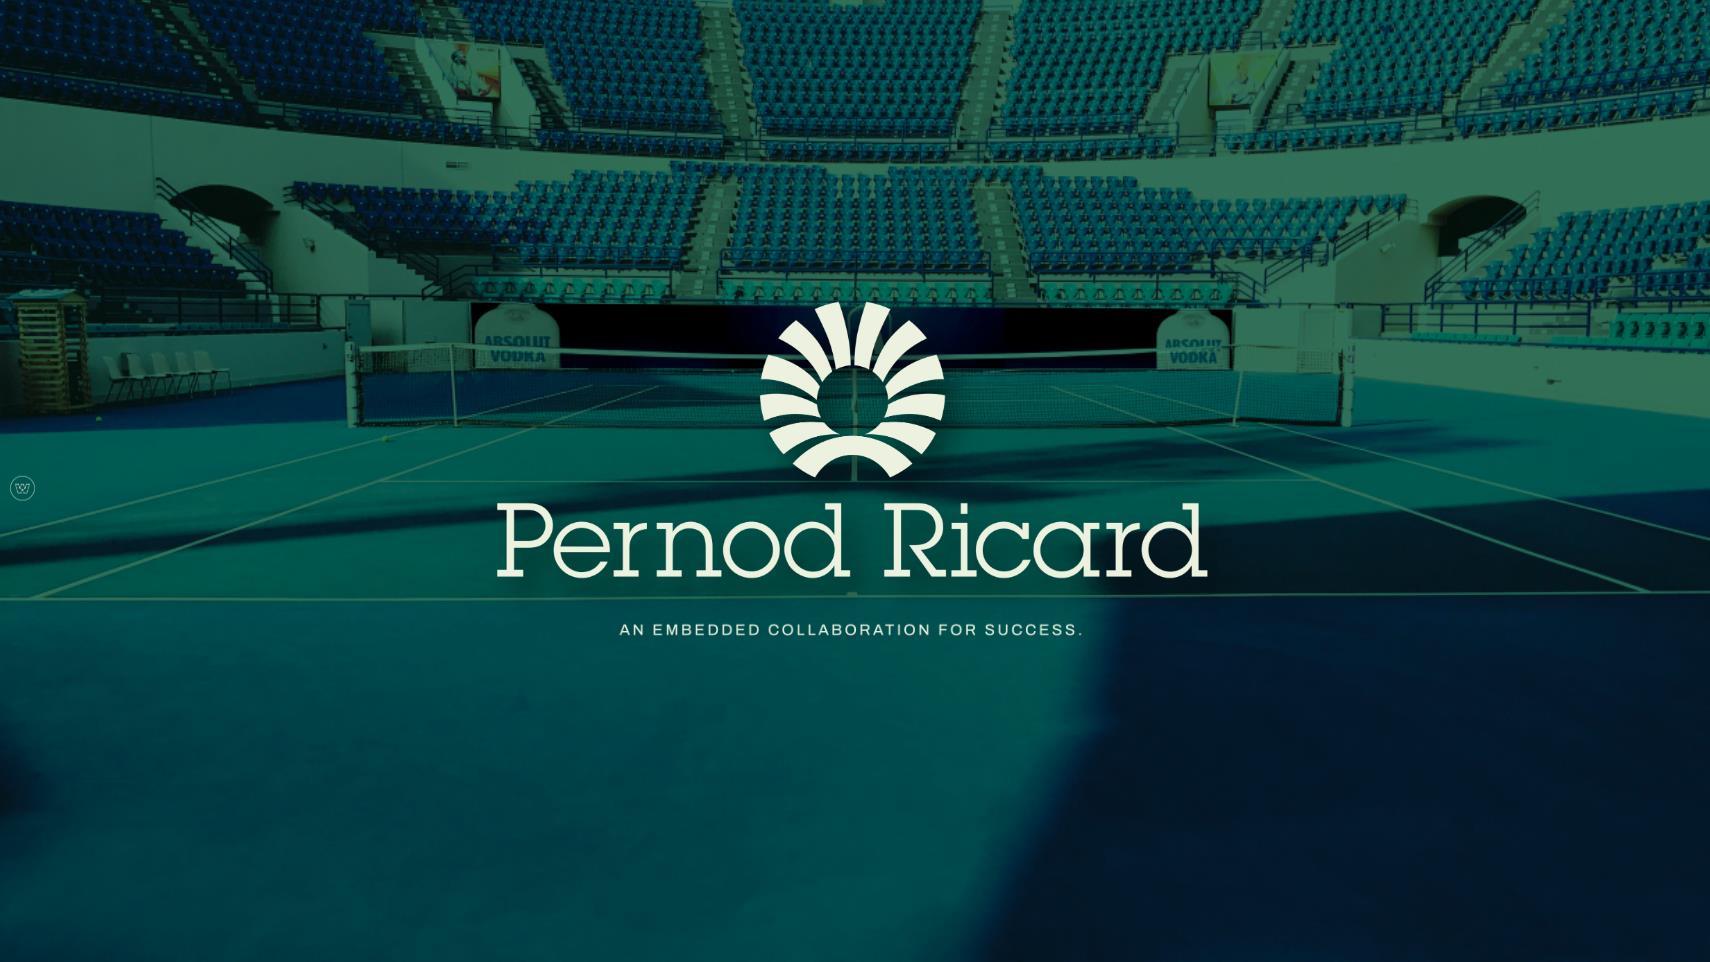 PERNOD RICARD | AN EMBEDDED COLLABORATION FOR SUCCESS